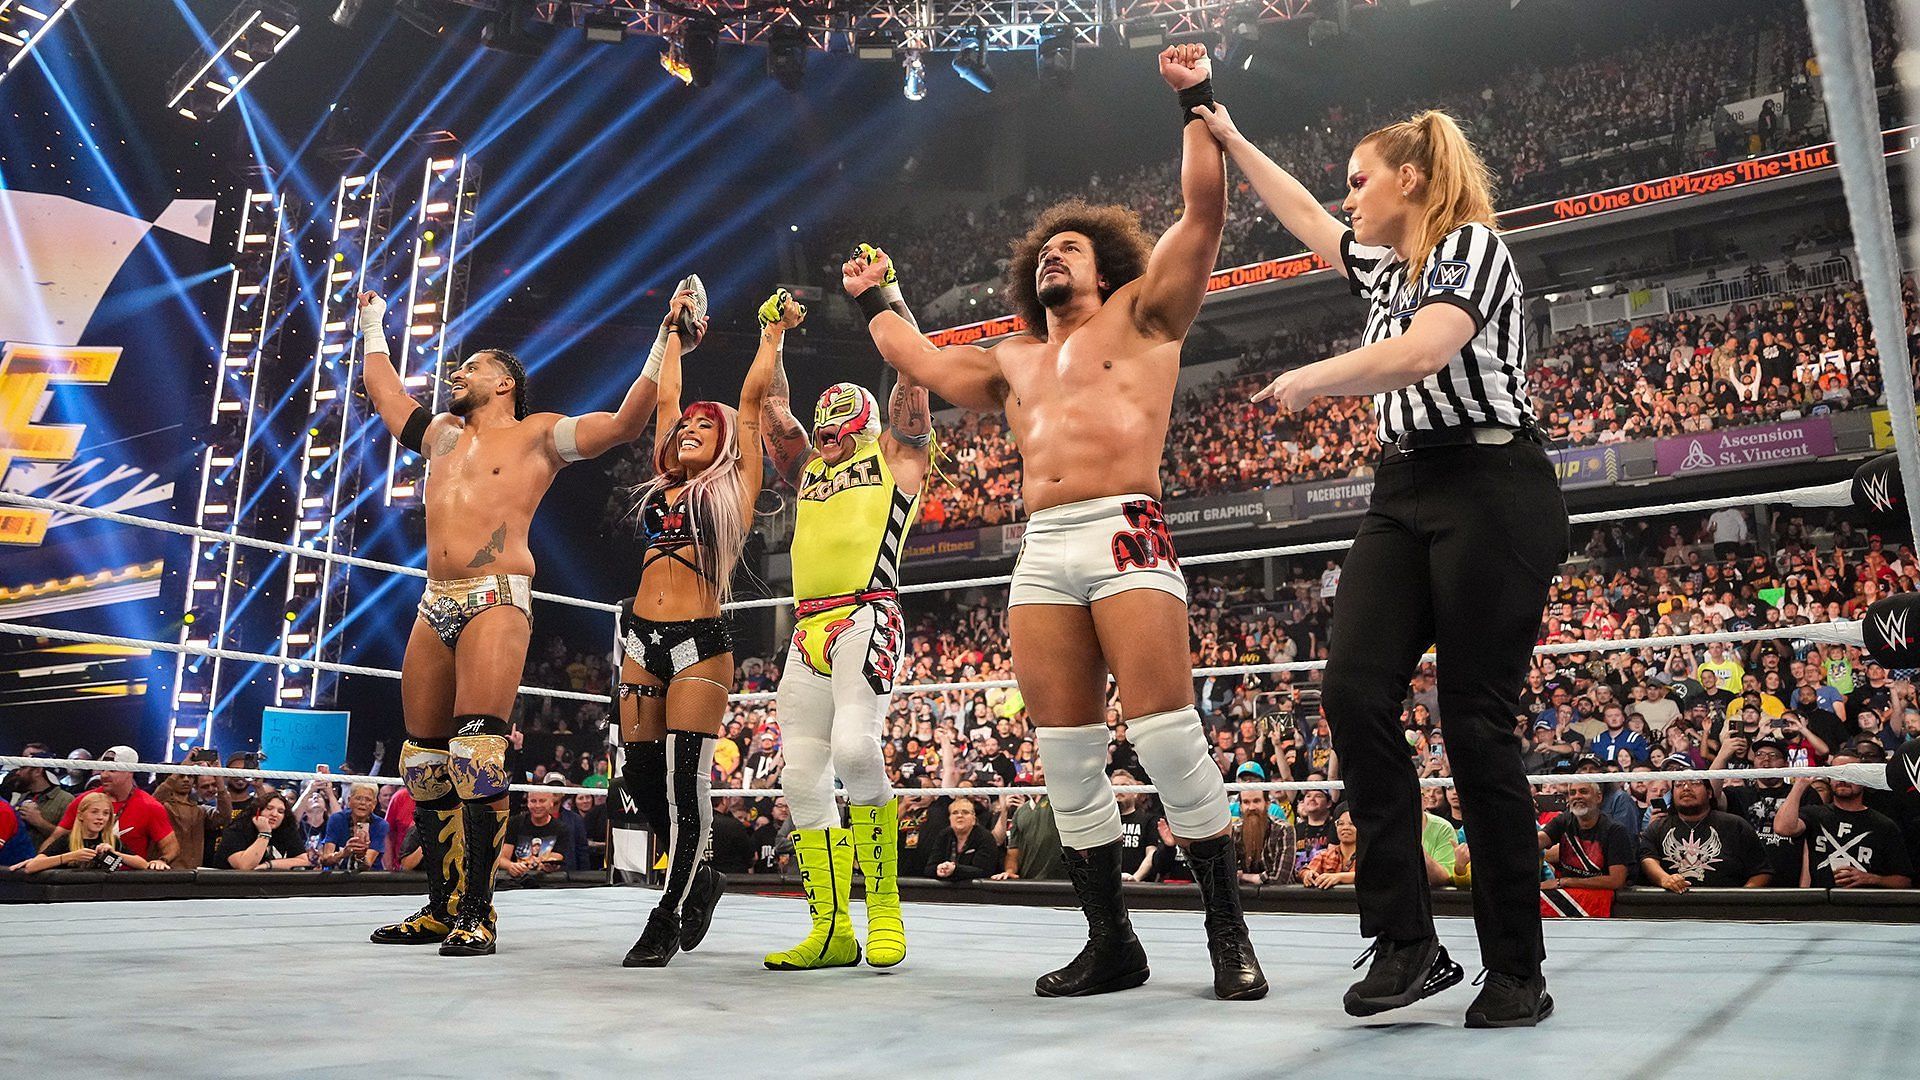 Carlito (second from right) and the Latino World Order (left)